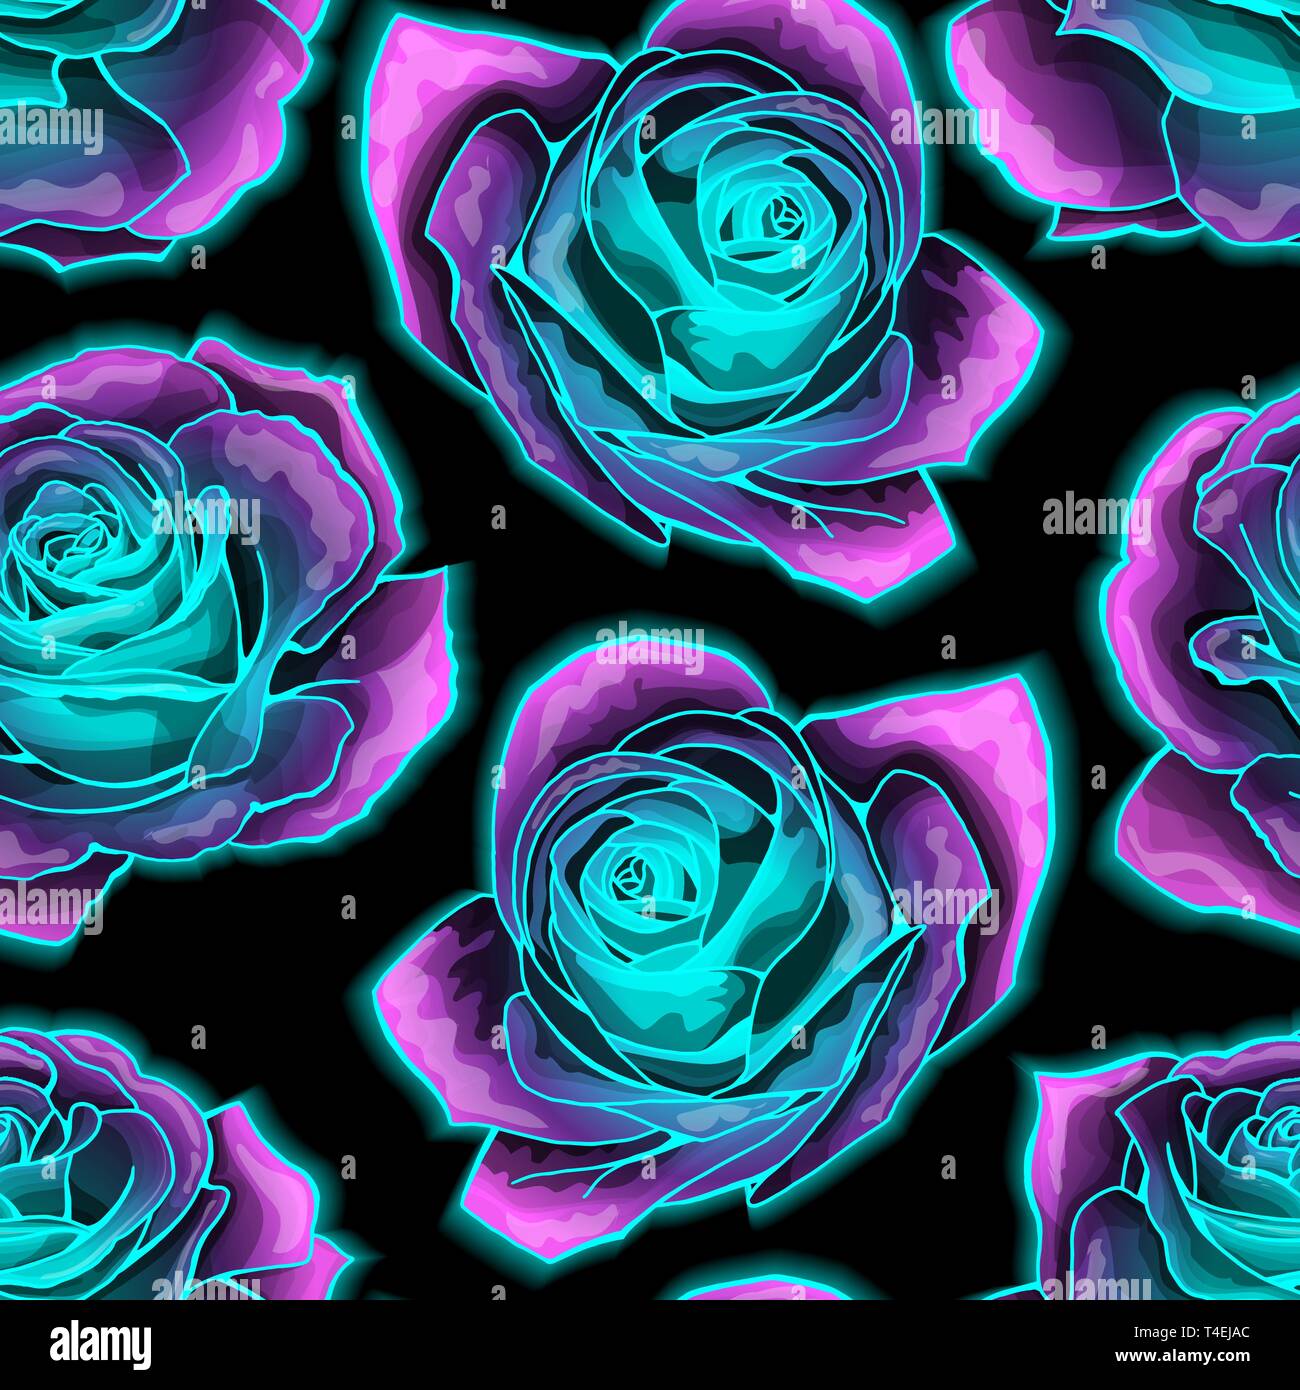 https://c8.alamy.com/comp/T4EJAC/vector-seamless-pattern-with-mysterious-neon-glowing-roses-background-T4EJAC.jpg